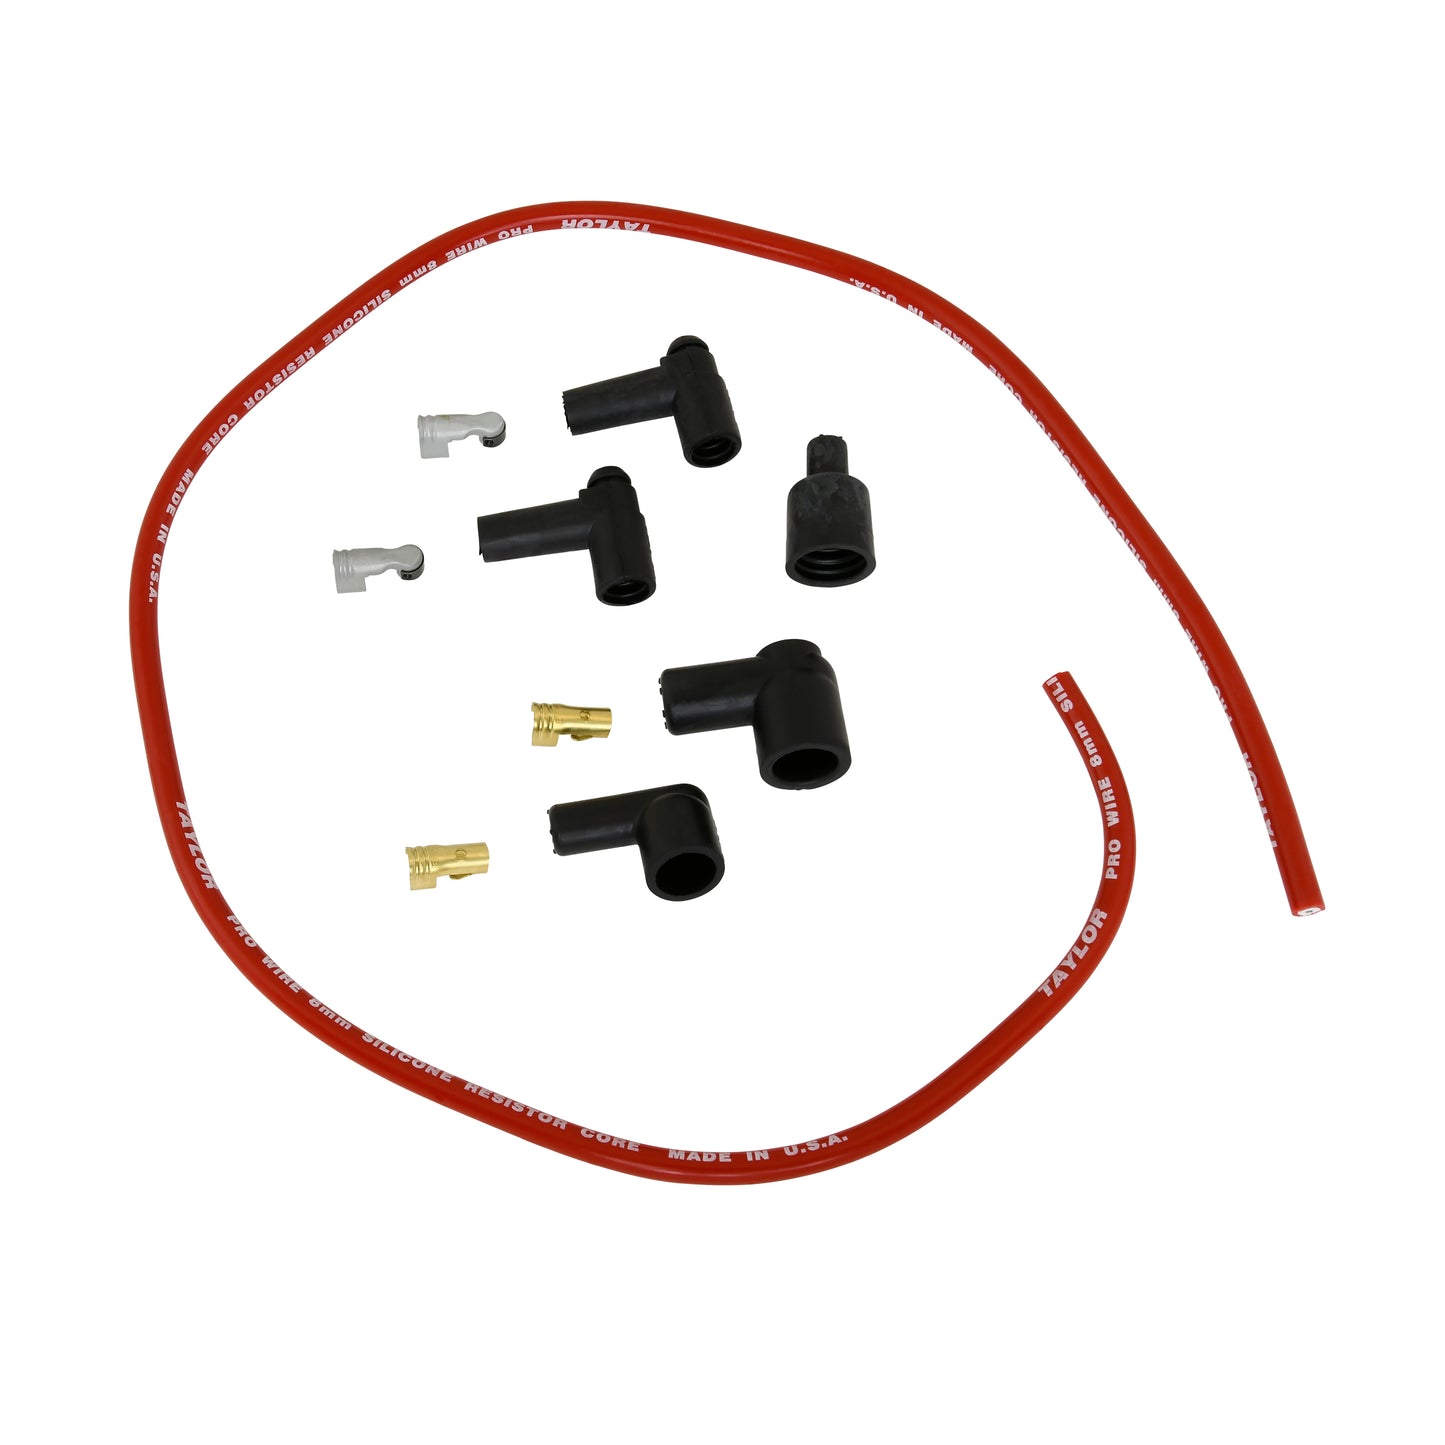 Taylor Cable  45329 8mm Pro Wire RC Coil Repair Kit red